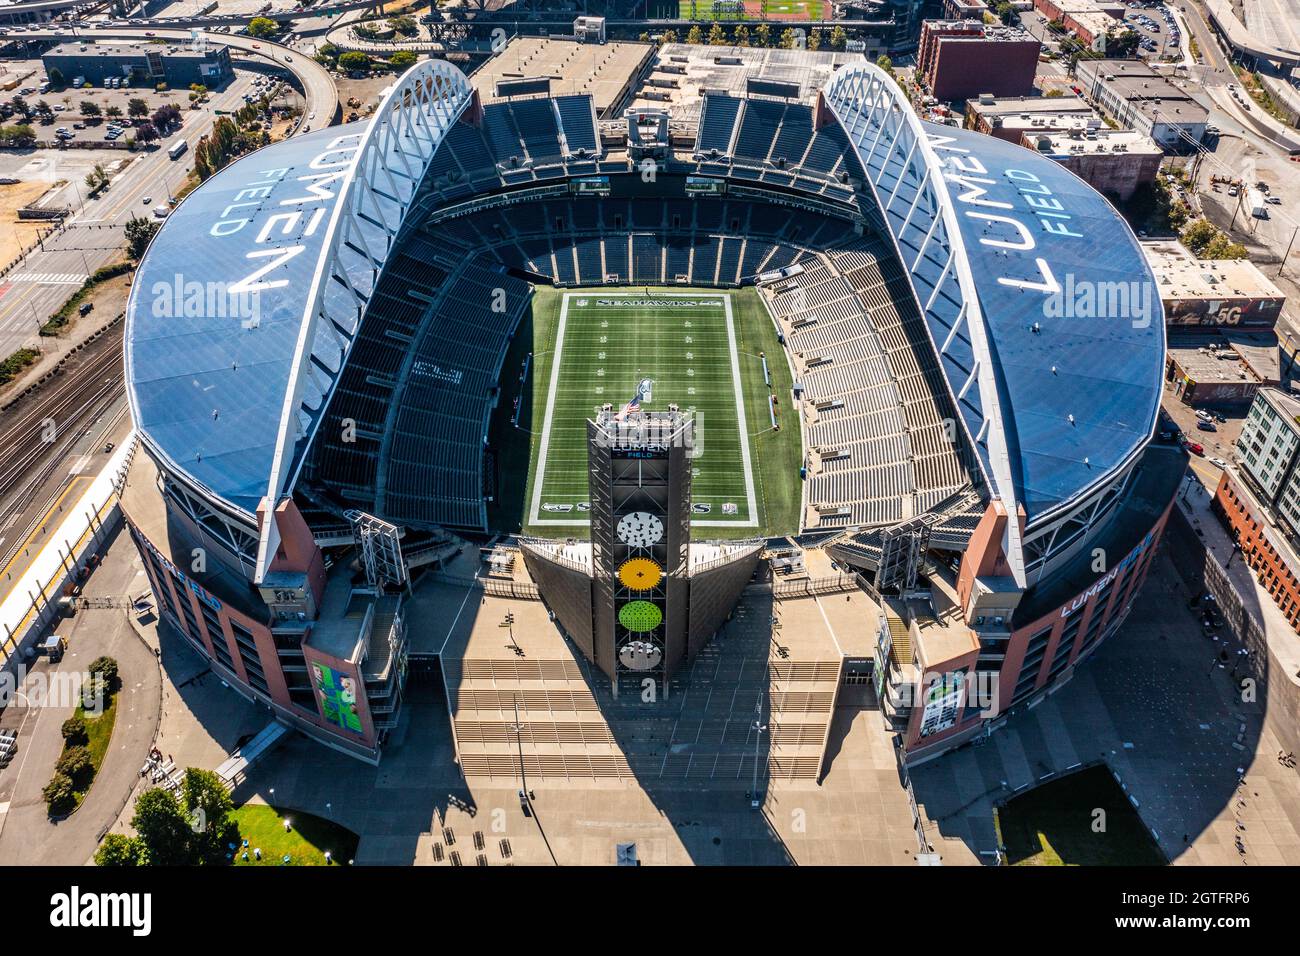 Lumen Field, Home of the Seahawks and Sounders, Seattle, Washington, USA Stock Photo